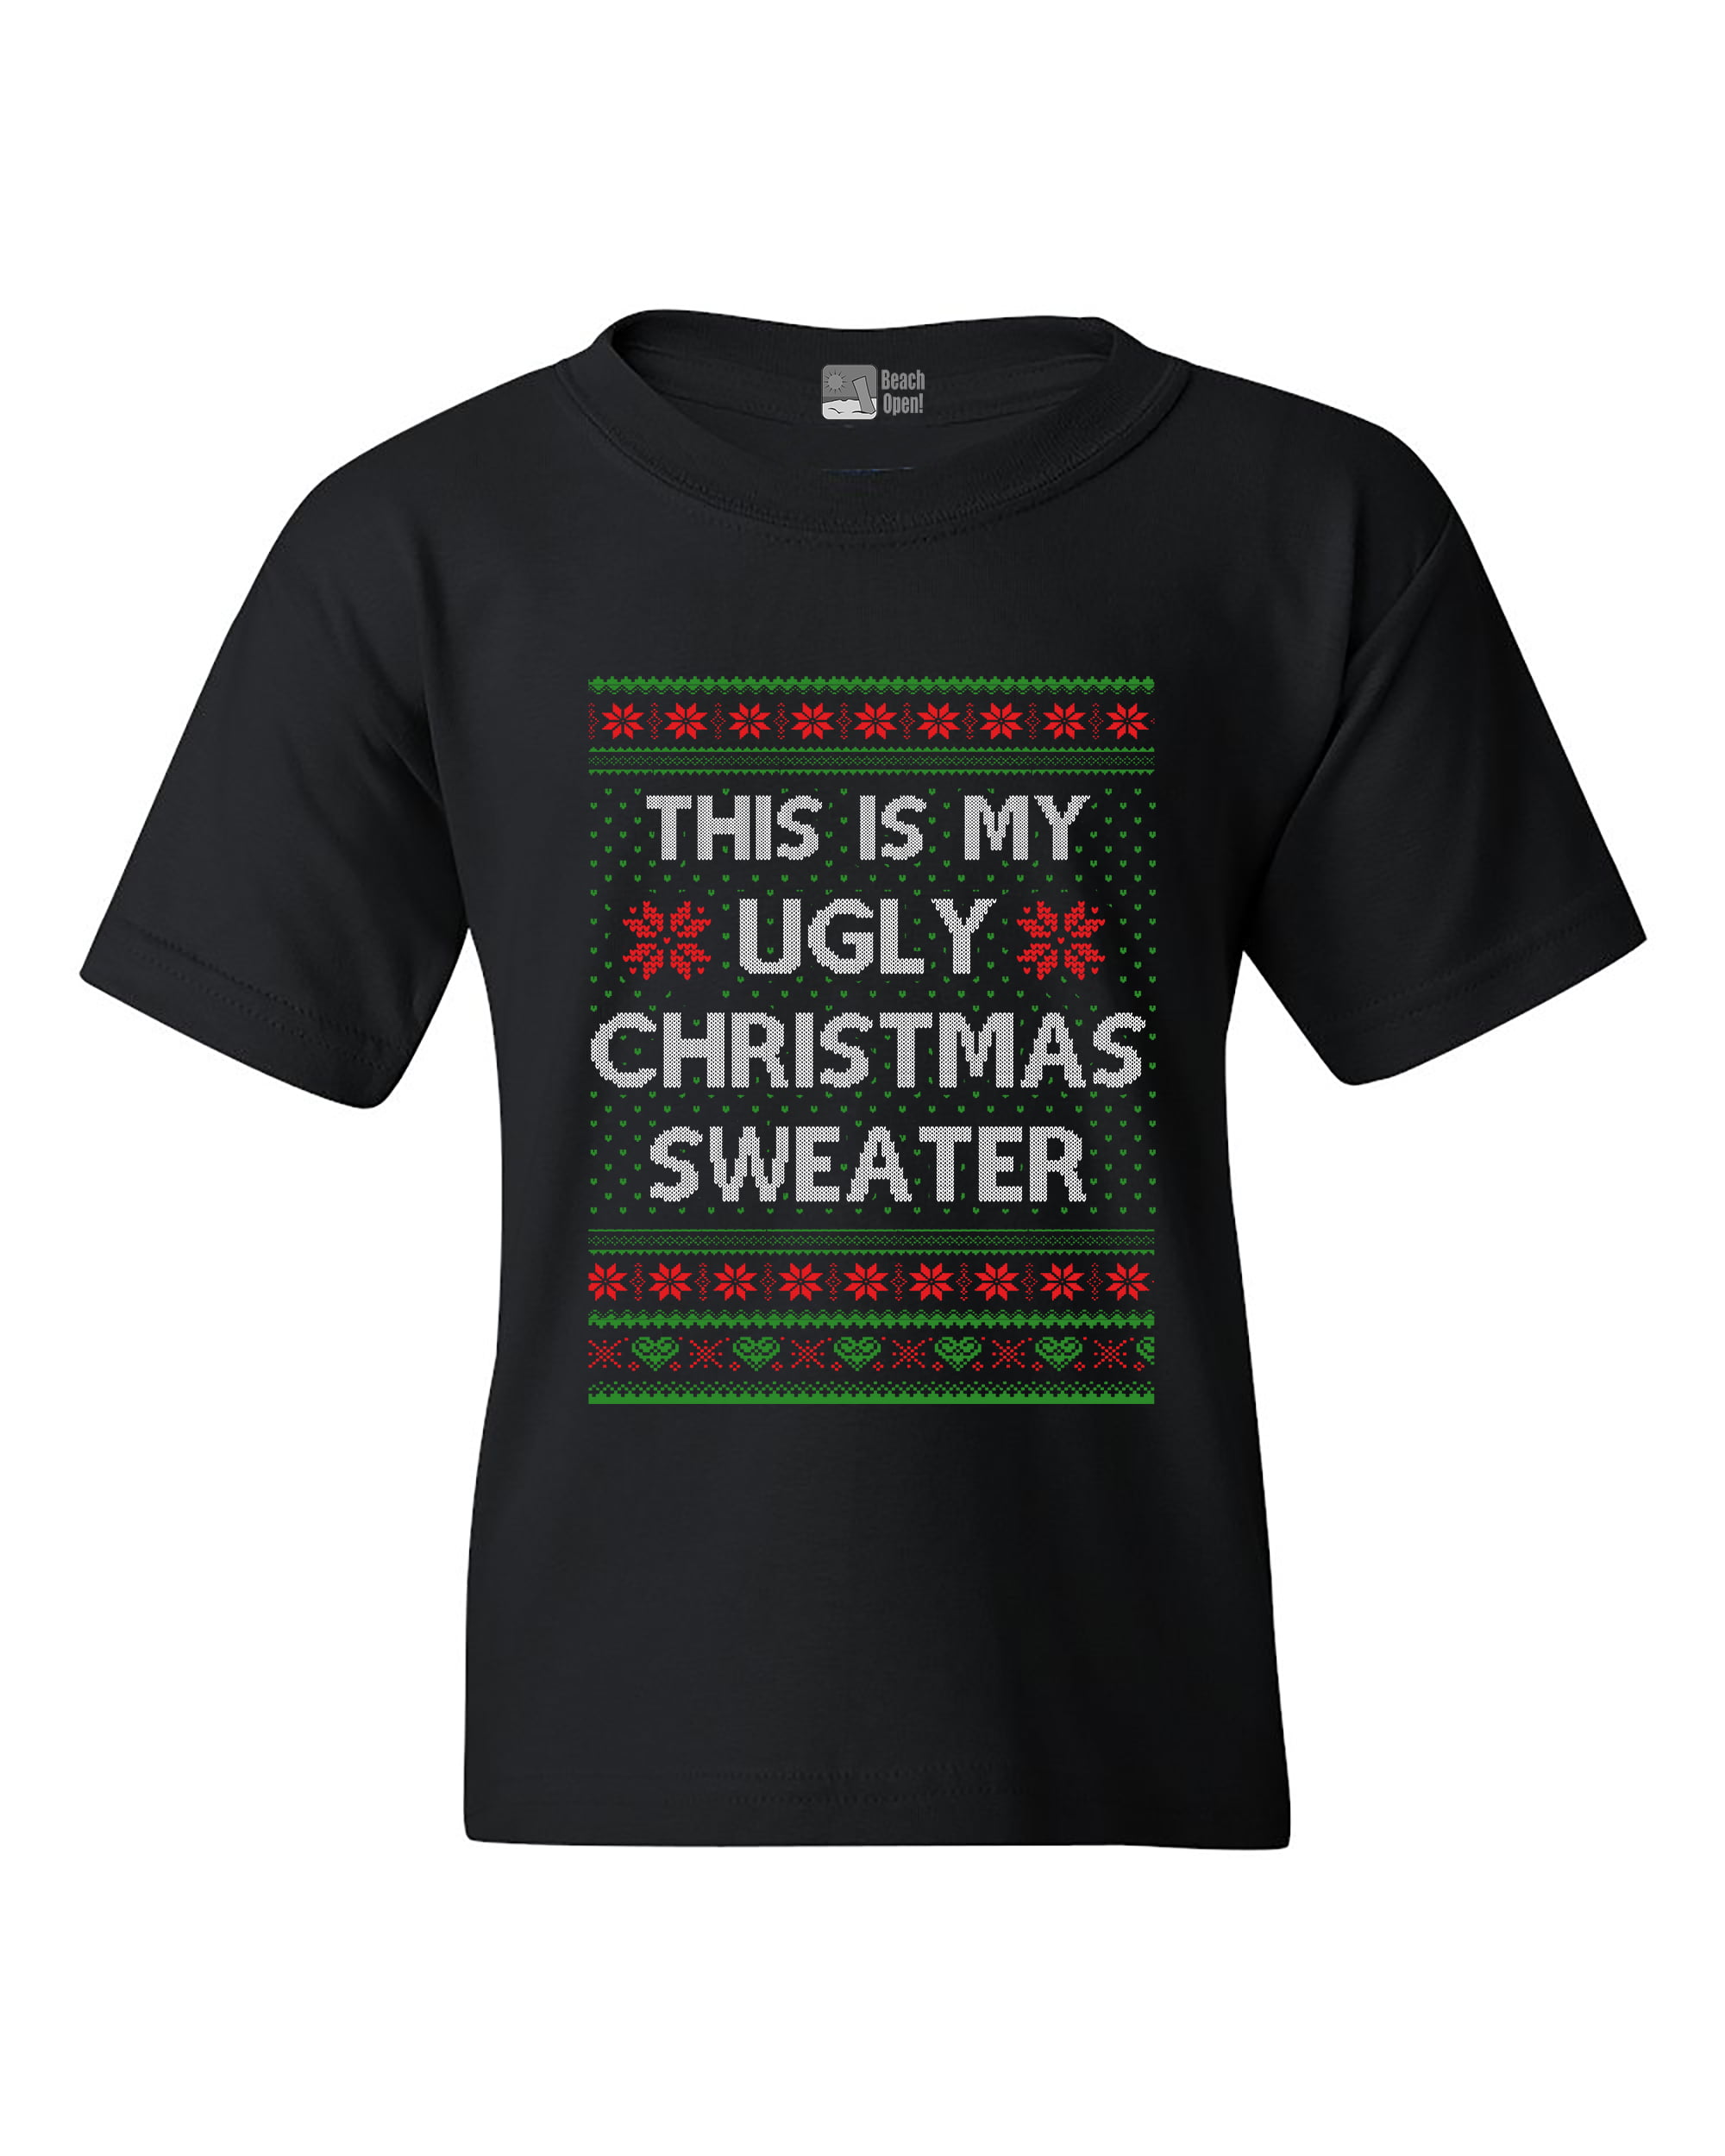 Beach Open This Is My Ugly Christmas Sweater Funny Dt Youth Kids T Shirt Tee Walmart Com - ugly black top hat roblox